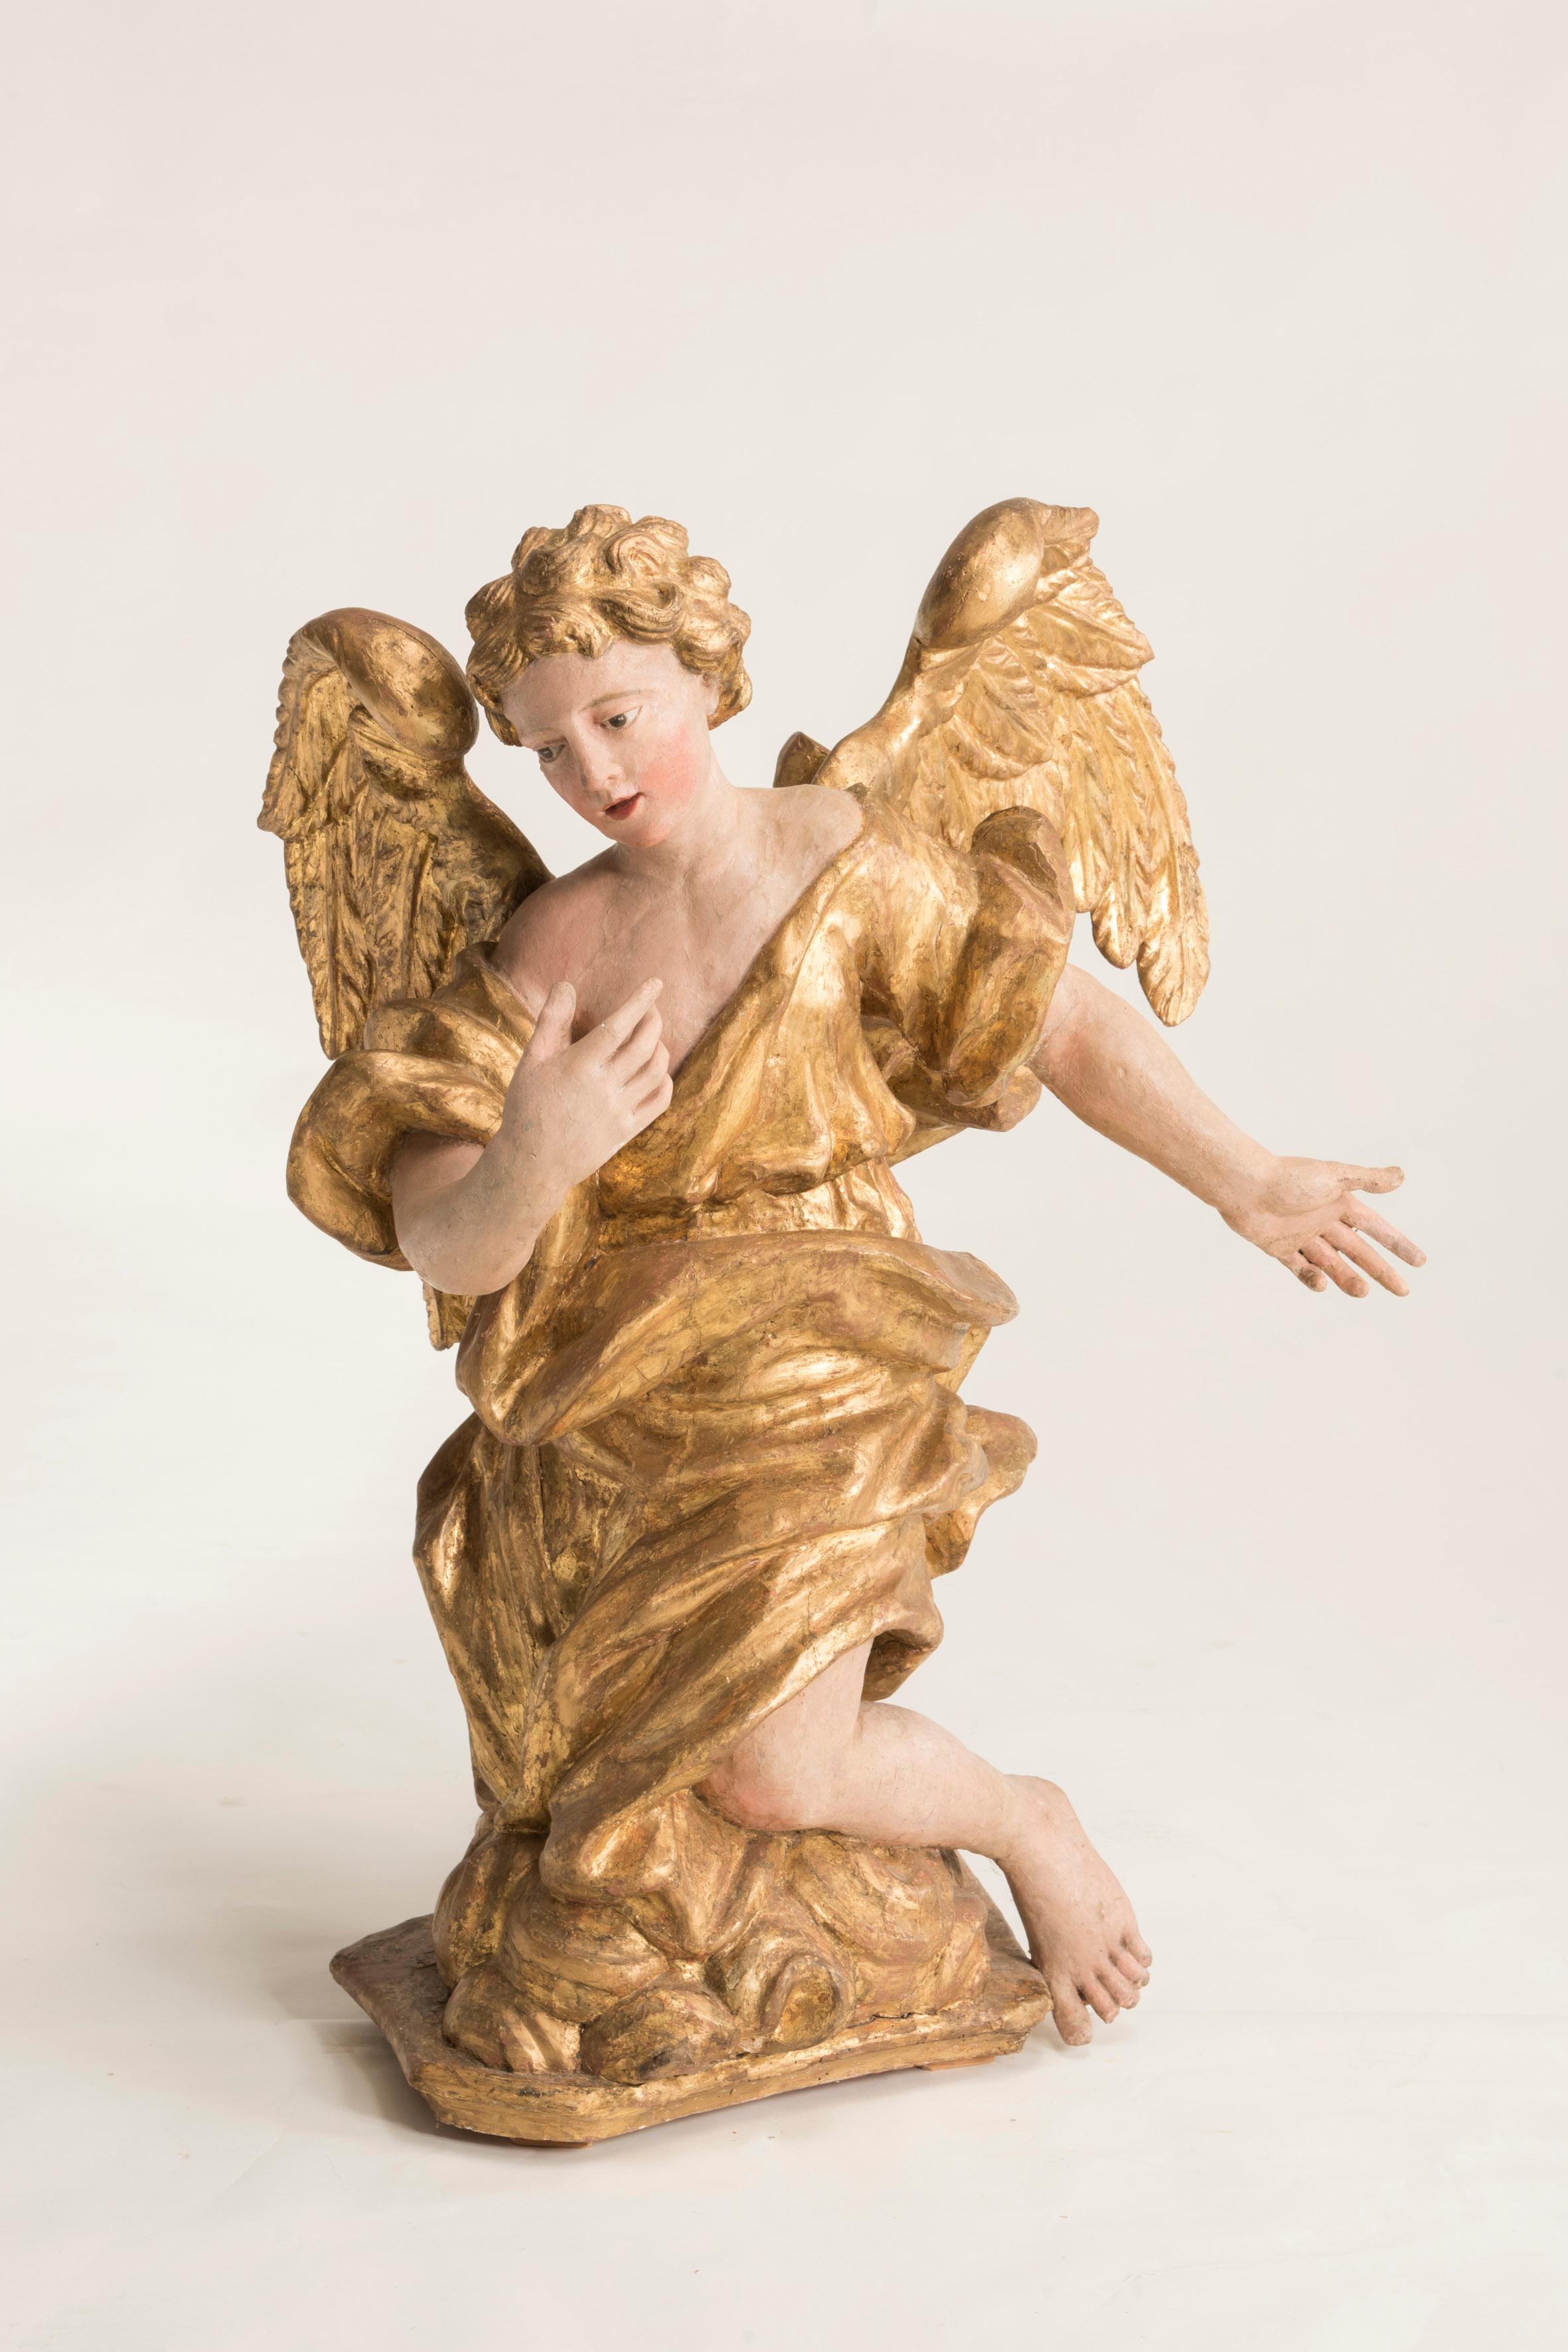 Italian 17th century gold foil and policrome wooden angel sculpture. This antique piece comes from Italy form Veneto Region, it represents a Christian Angel inlaid in wood.
It presents Incredible excellent conditions given the age and the material,